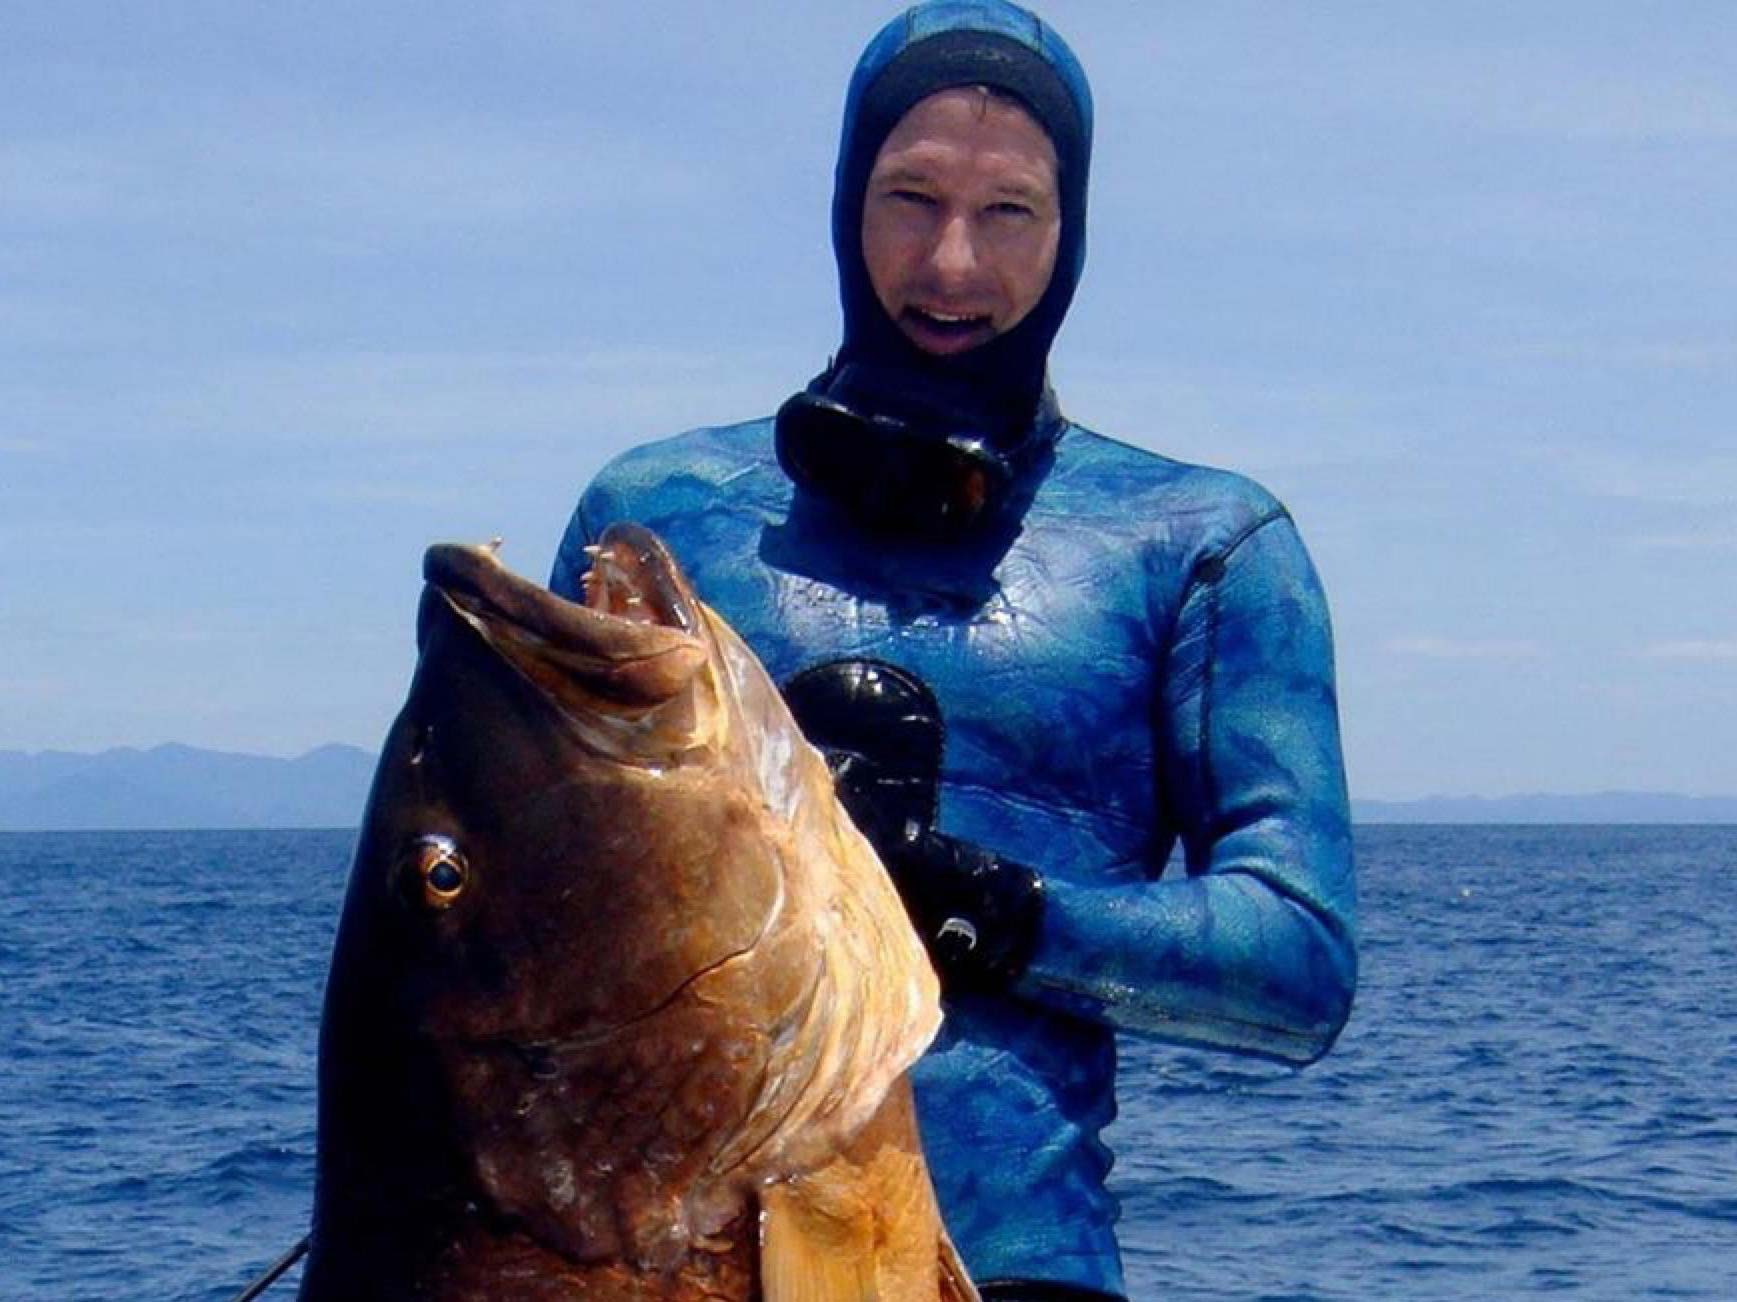 Cameron Kirkconnell posing with a big fish